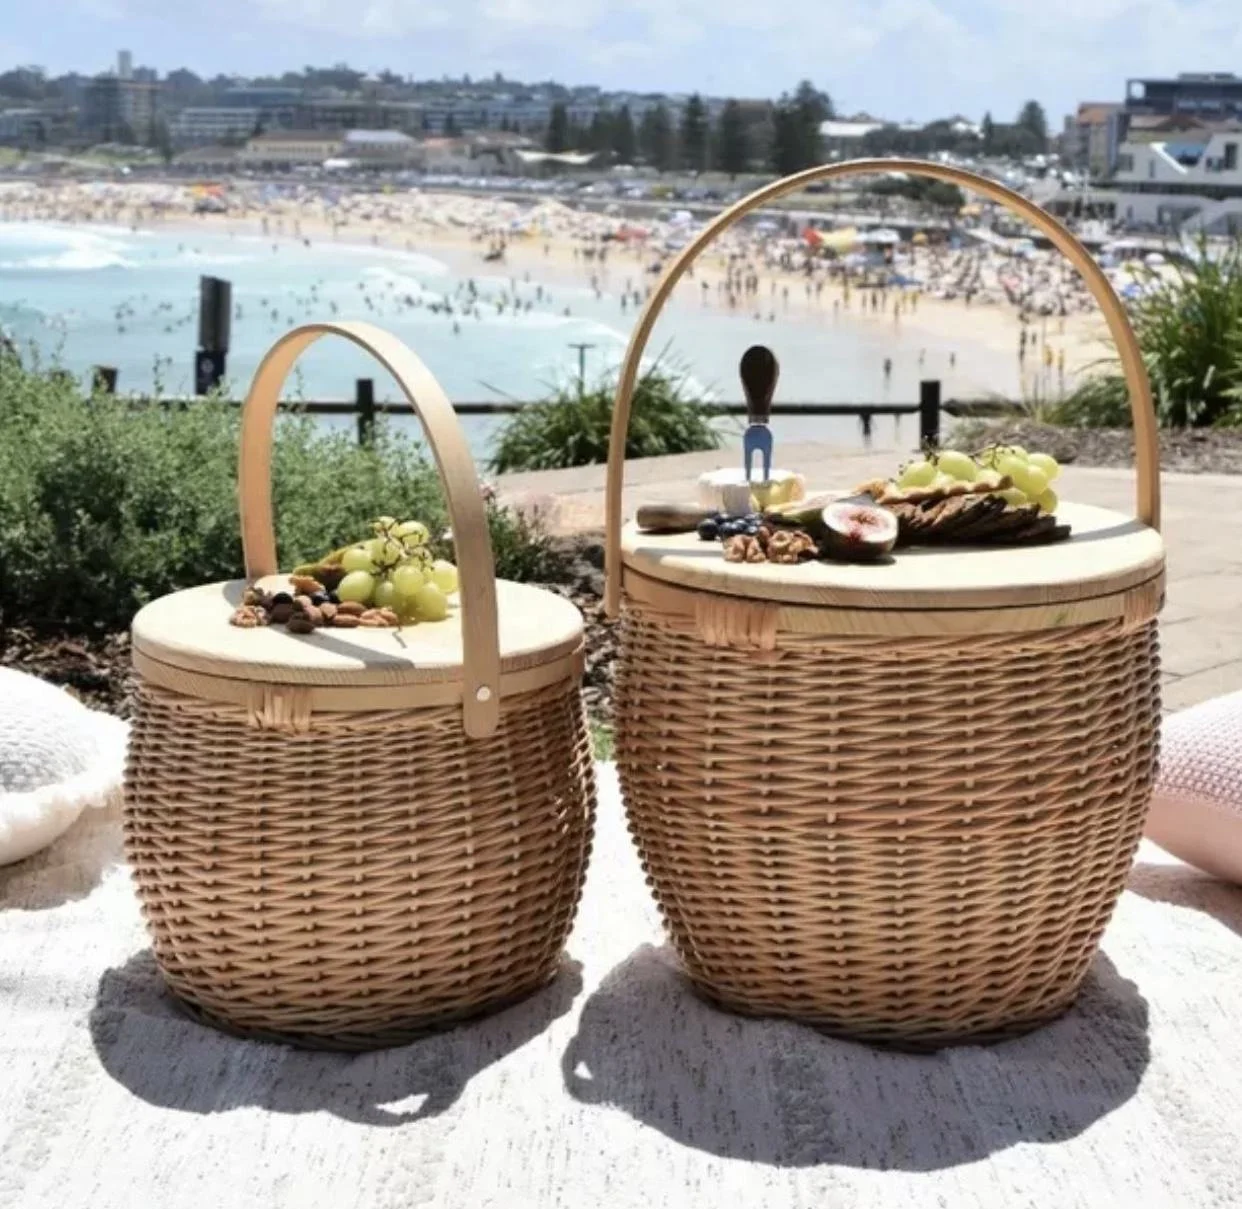 

Wholesale Round Wicker Classic Large Picnic Basket For 2 Person With Lid And Put Down Handle Storage Picnic Basket Willow Basket, Natural or oem